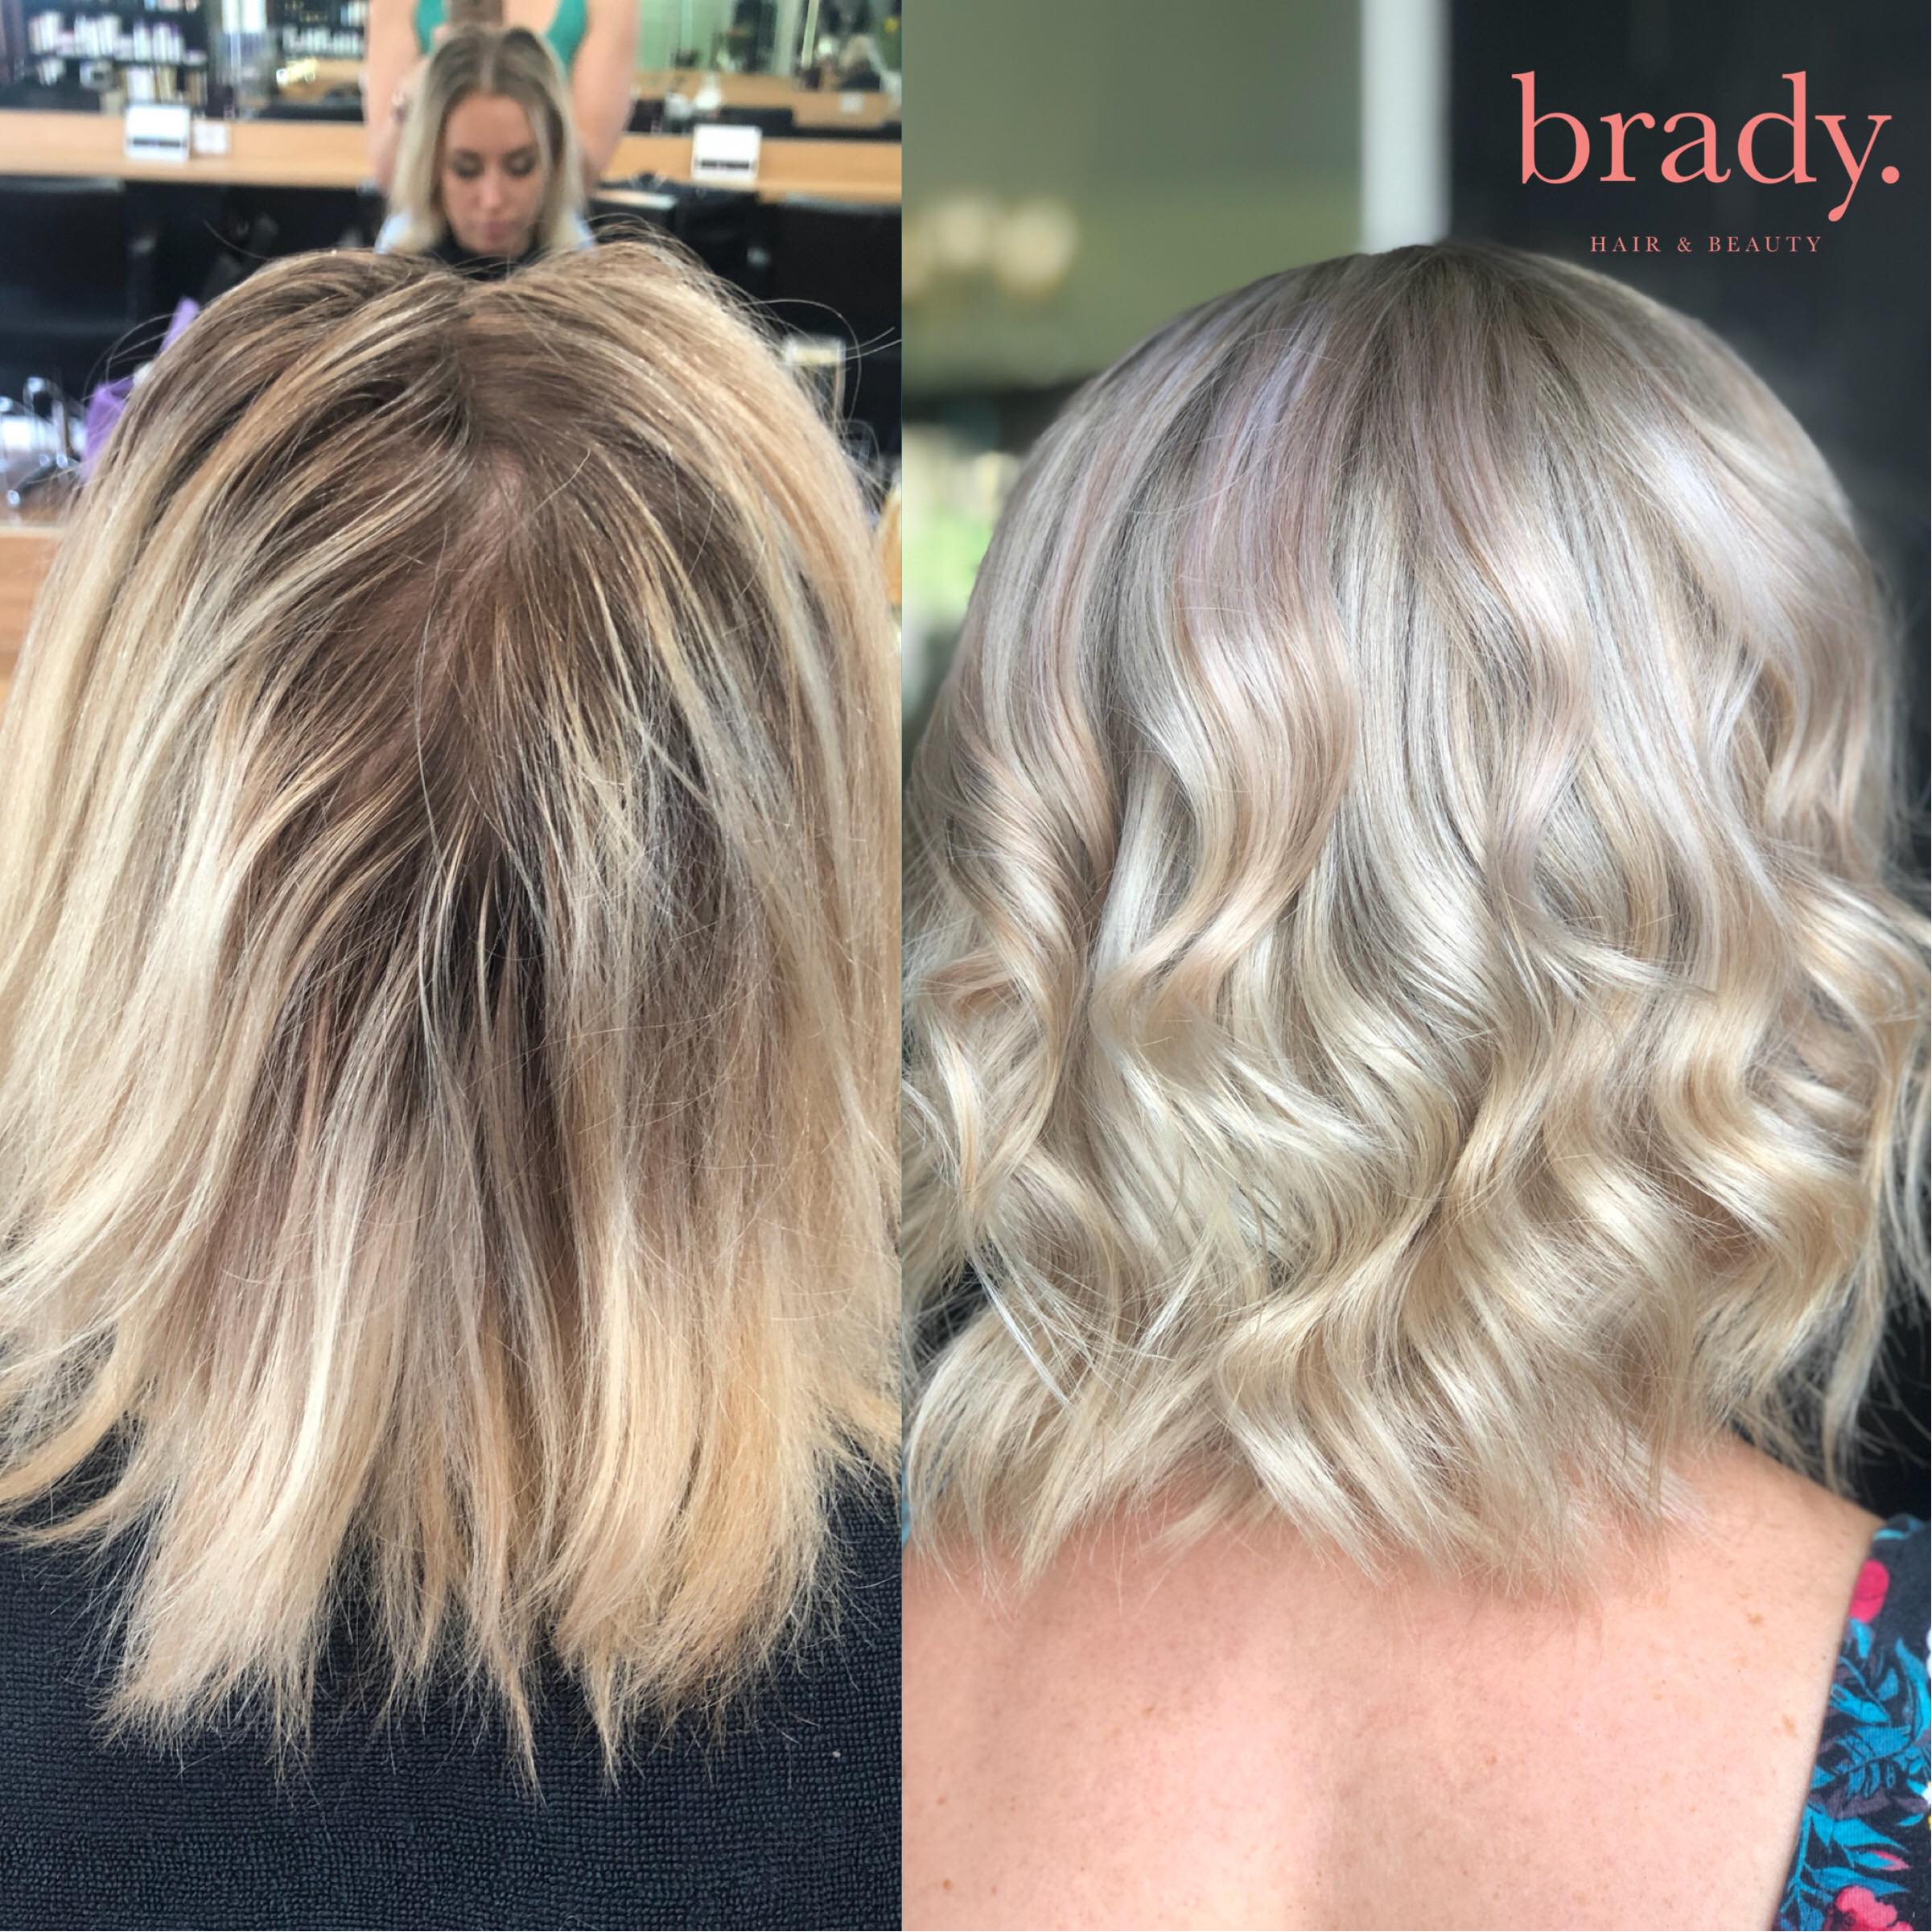  Before and after photo - medium wavy blonde hair styled by Brady. Hair &amp; Beauty, Toowong, Brisbane. 